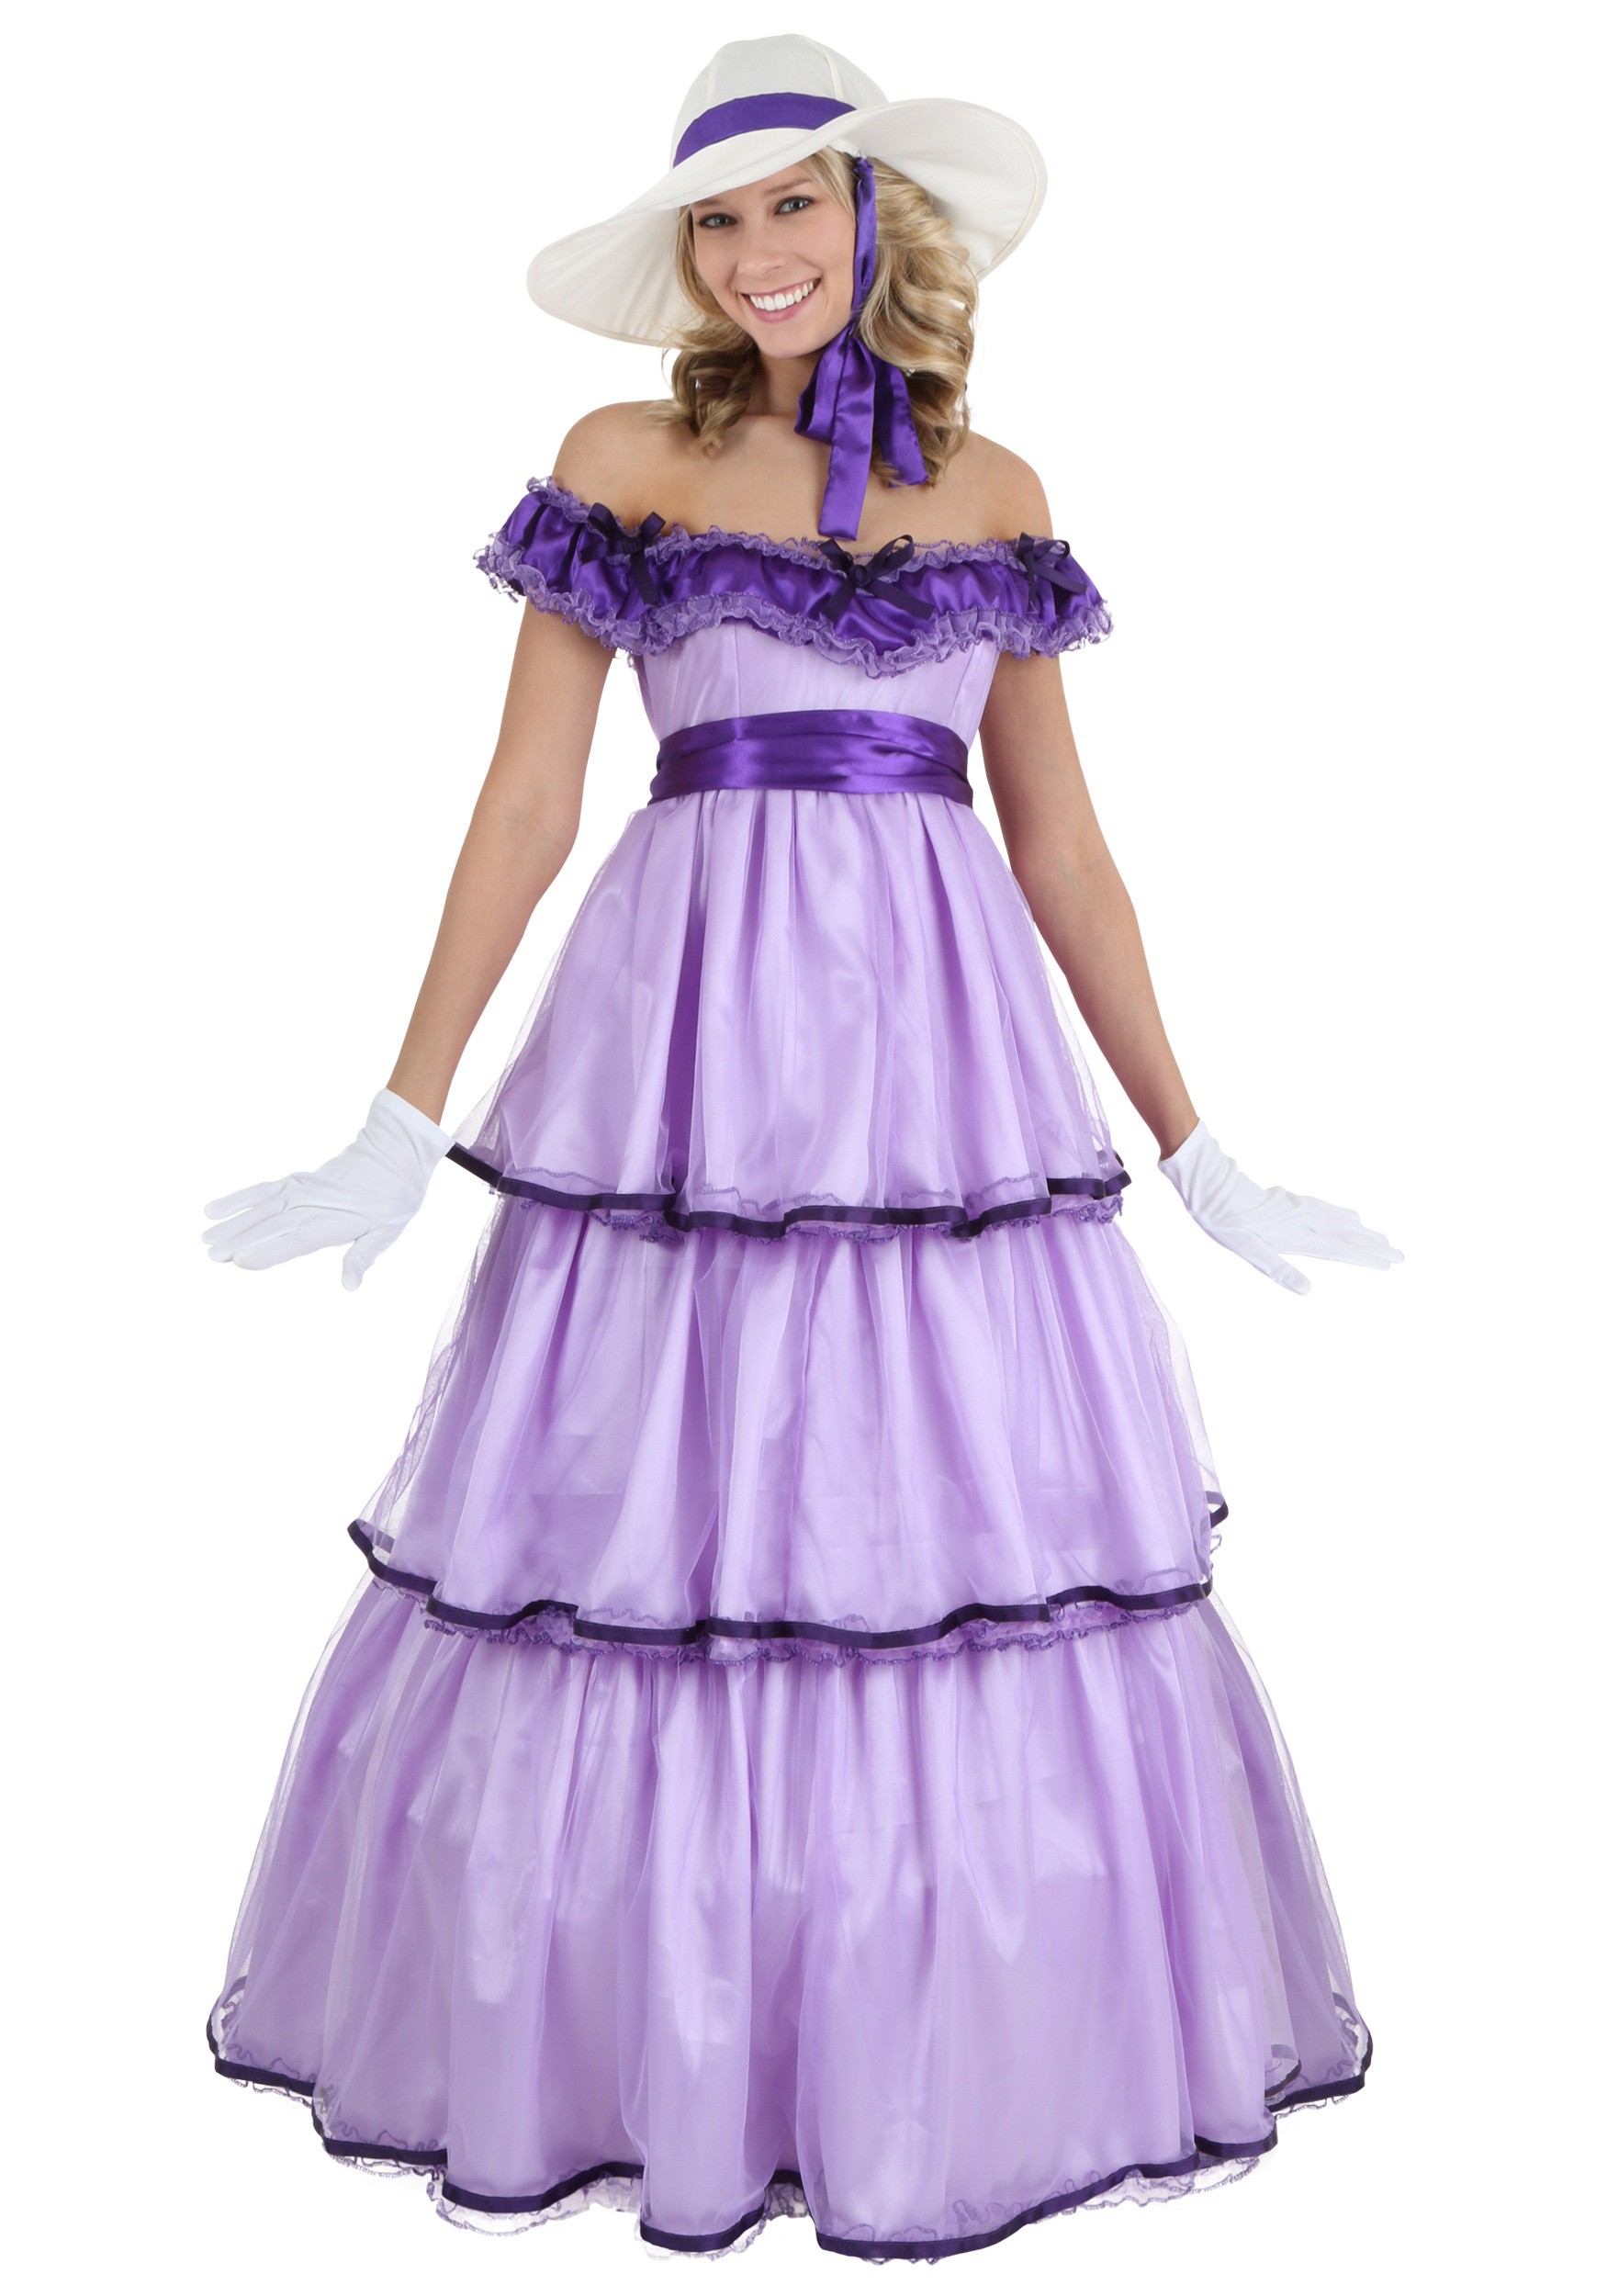 Deluxe Southern Belle Adult Costume